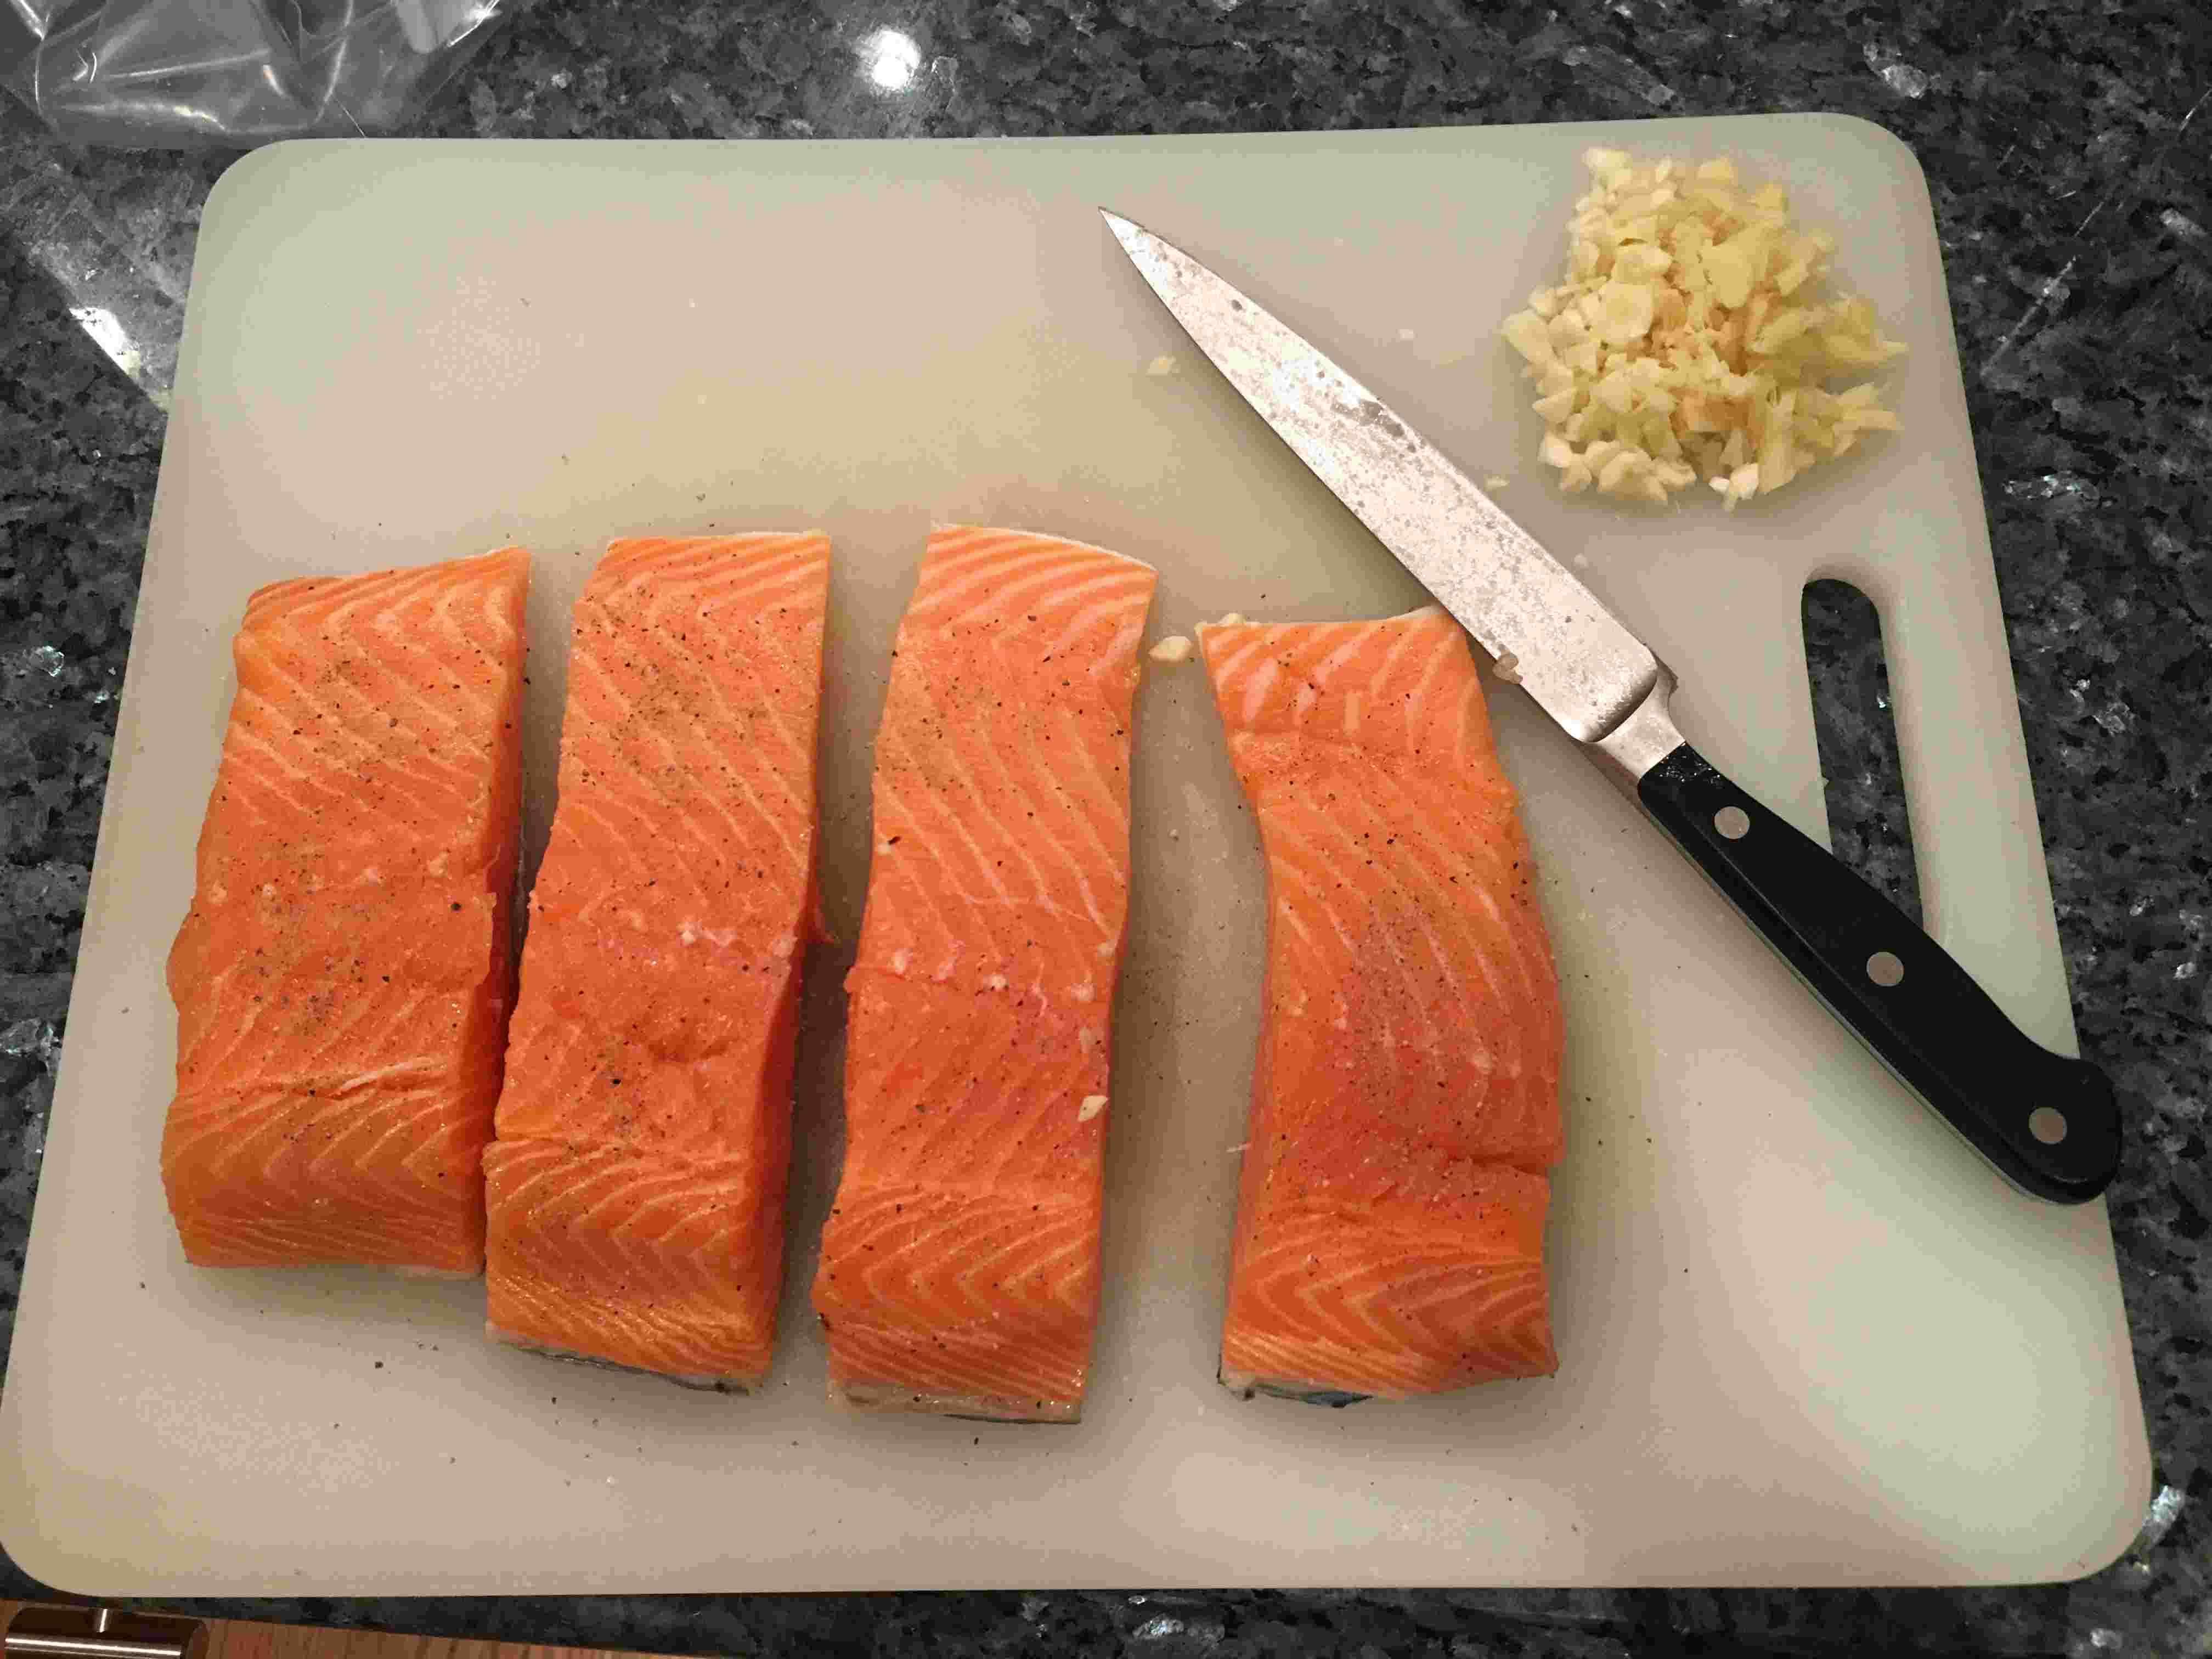 Salmon is seasoned with salt and pepper. Garlic and ginger are ready for the kale.